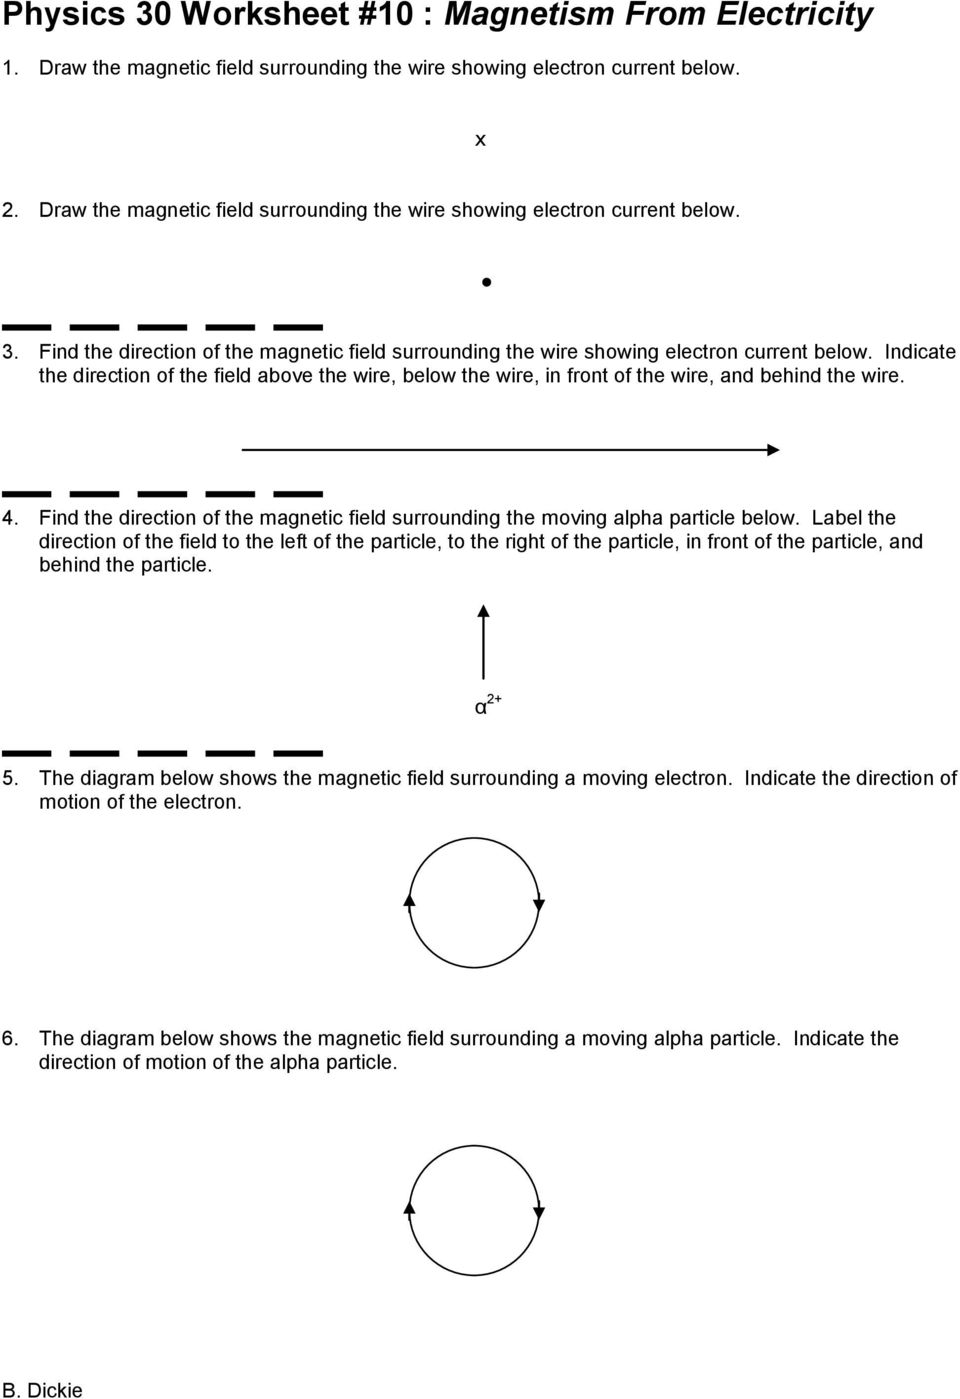 intro to magnetism worksheet answers Cheaper Than Retail Price With Regard To Bill Nye Magnetism Worksheet Answers